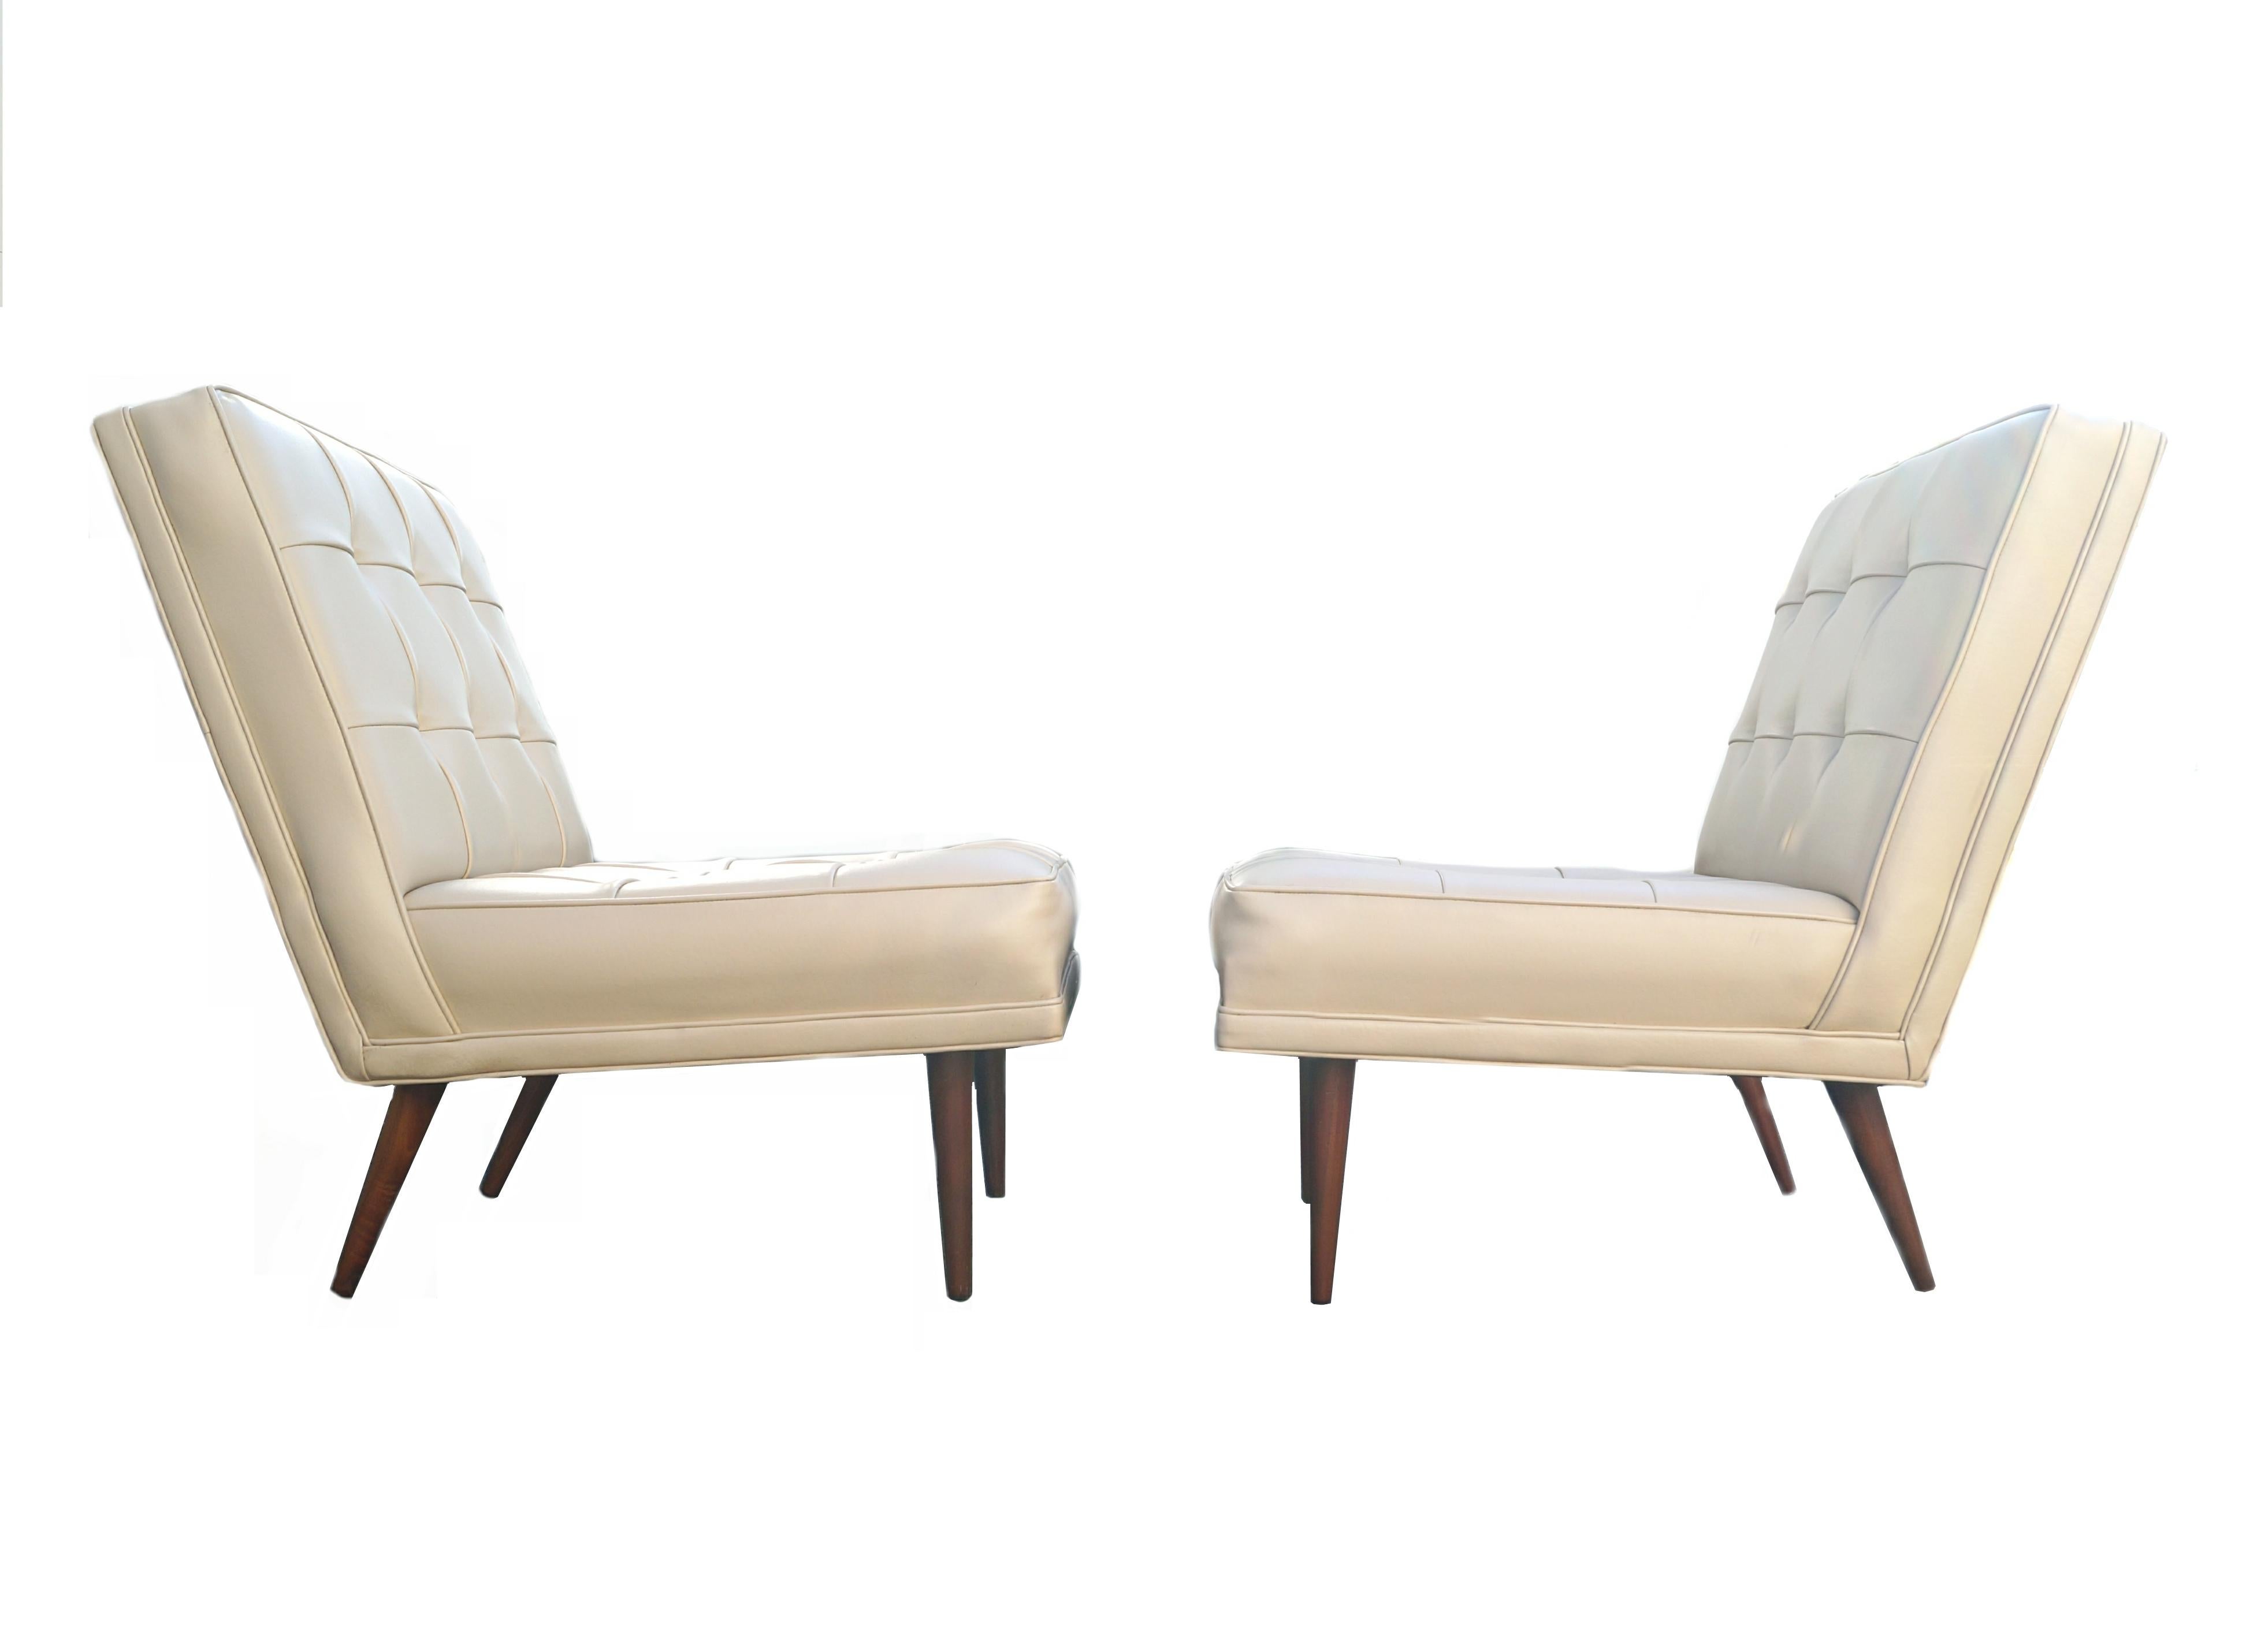 Pair of Mid-Century Modern Lounge Slipper Chairs Manner of Paul McCobb In Good Condition For Sale In Wayne, NJ